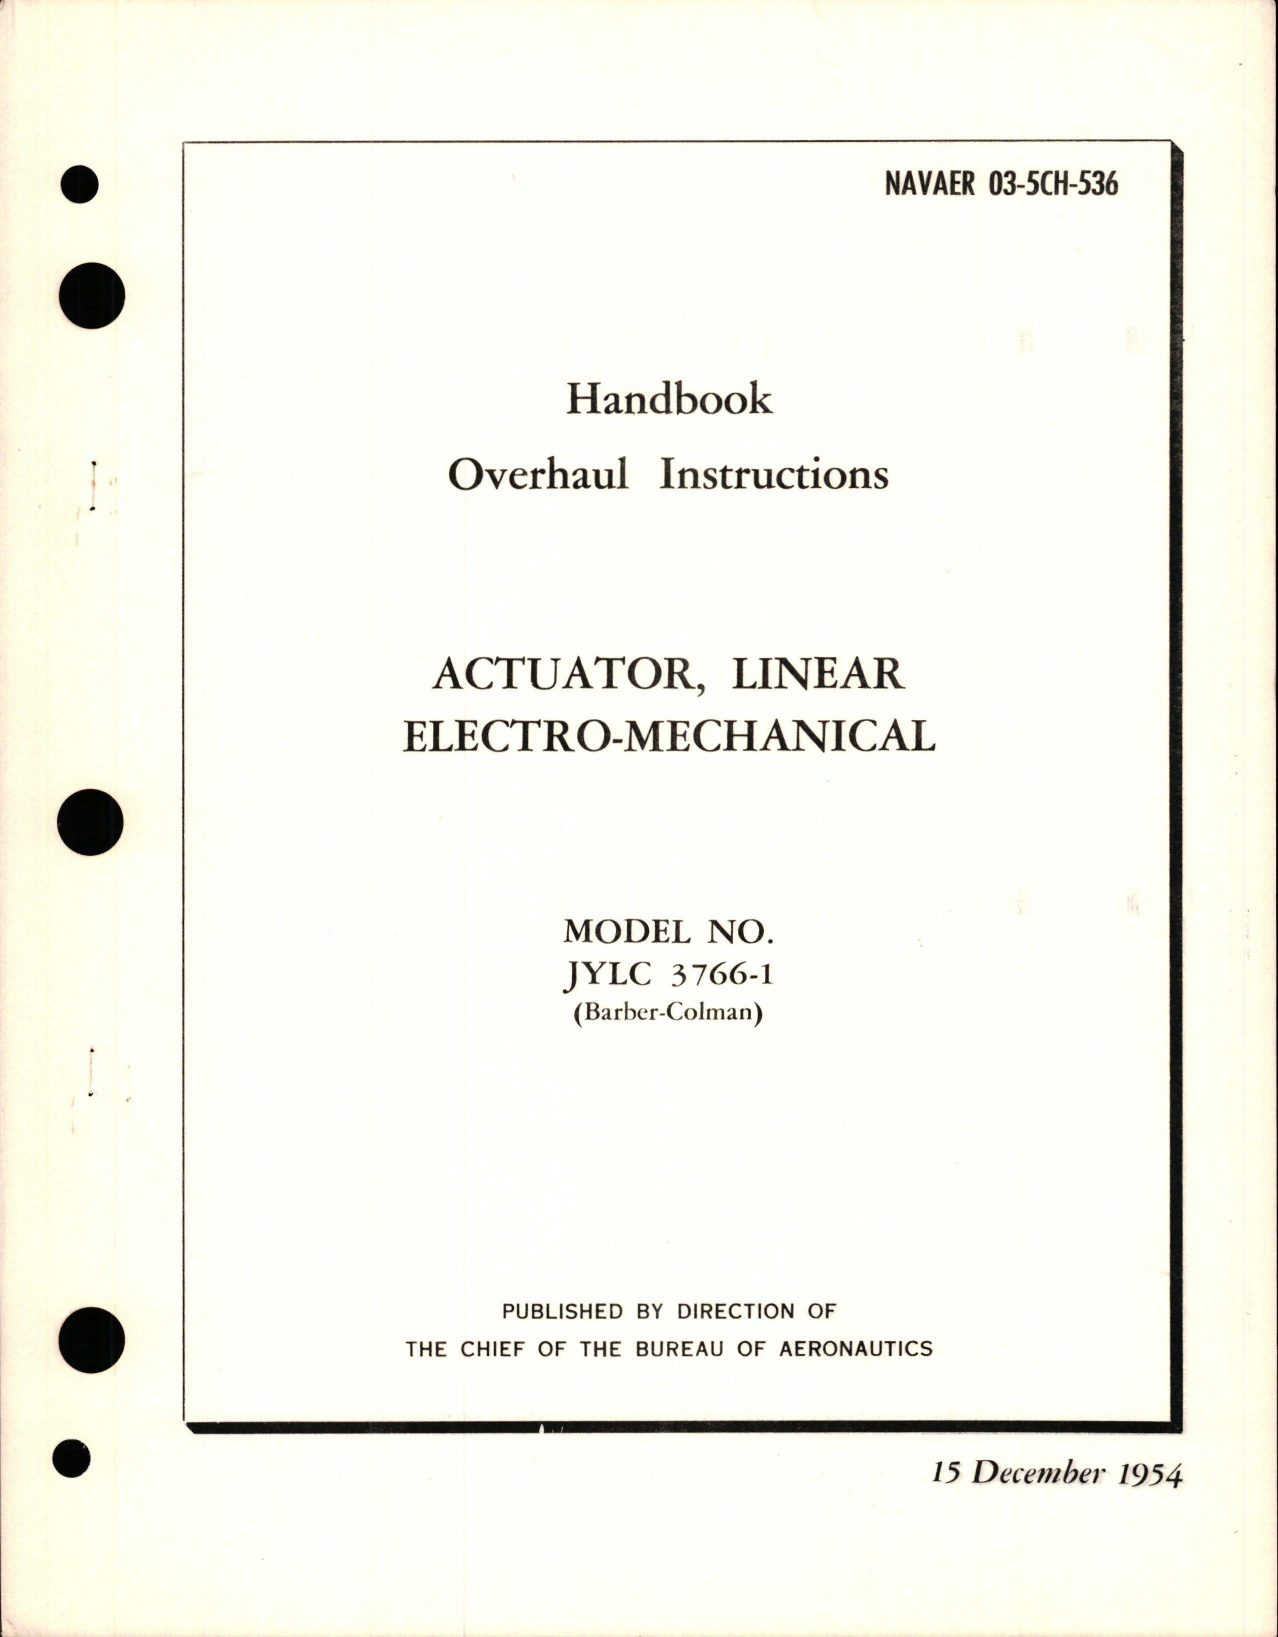 Sample page 1 from AirCorps Library document: Overhaul Instructions for Linear Electro-Mechanical Actuator - Model JYLC 3766-1